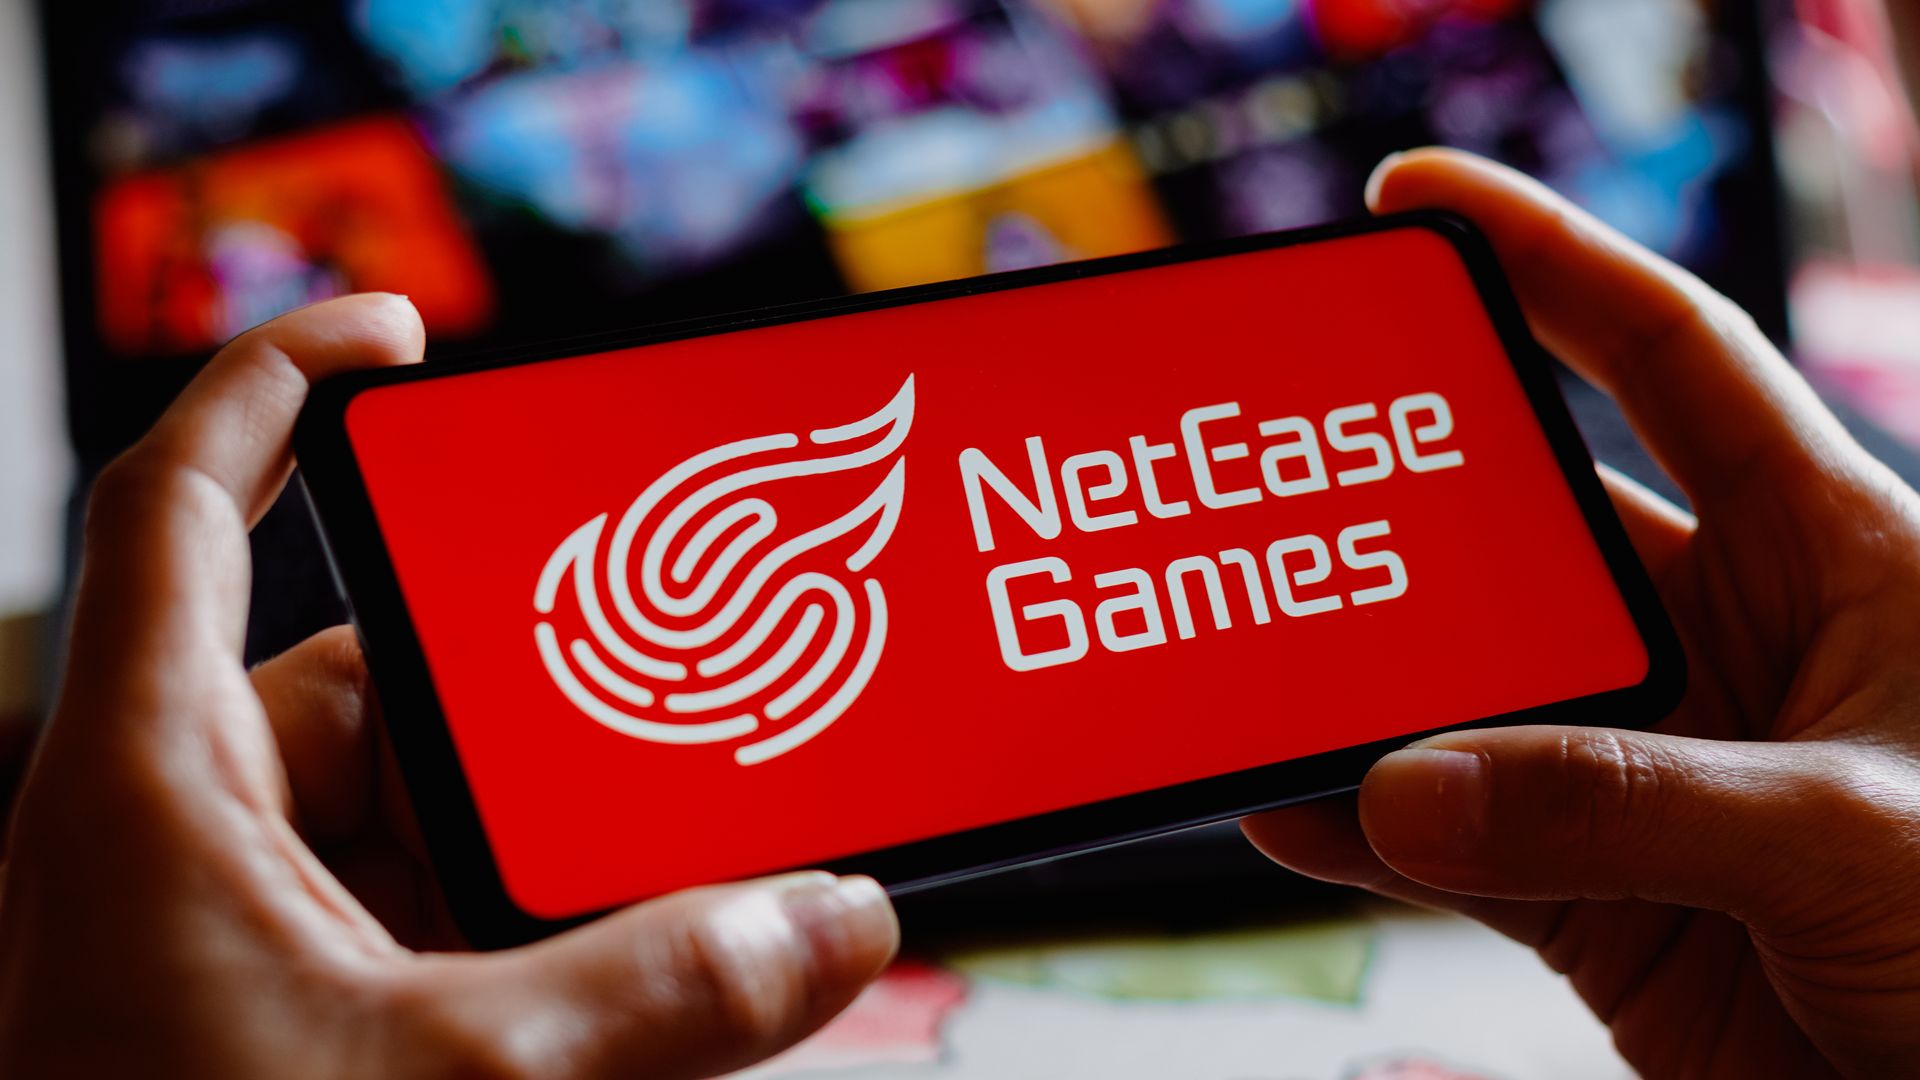 Close-up photo of hands holding  a phone that displays the NetEase Games logo